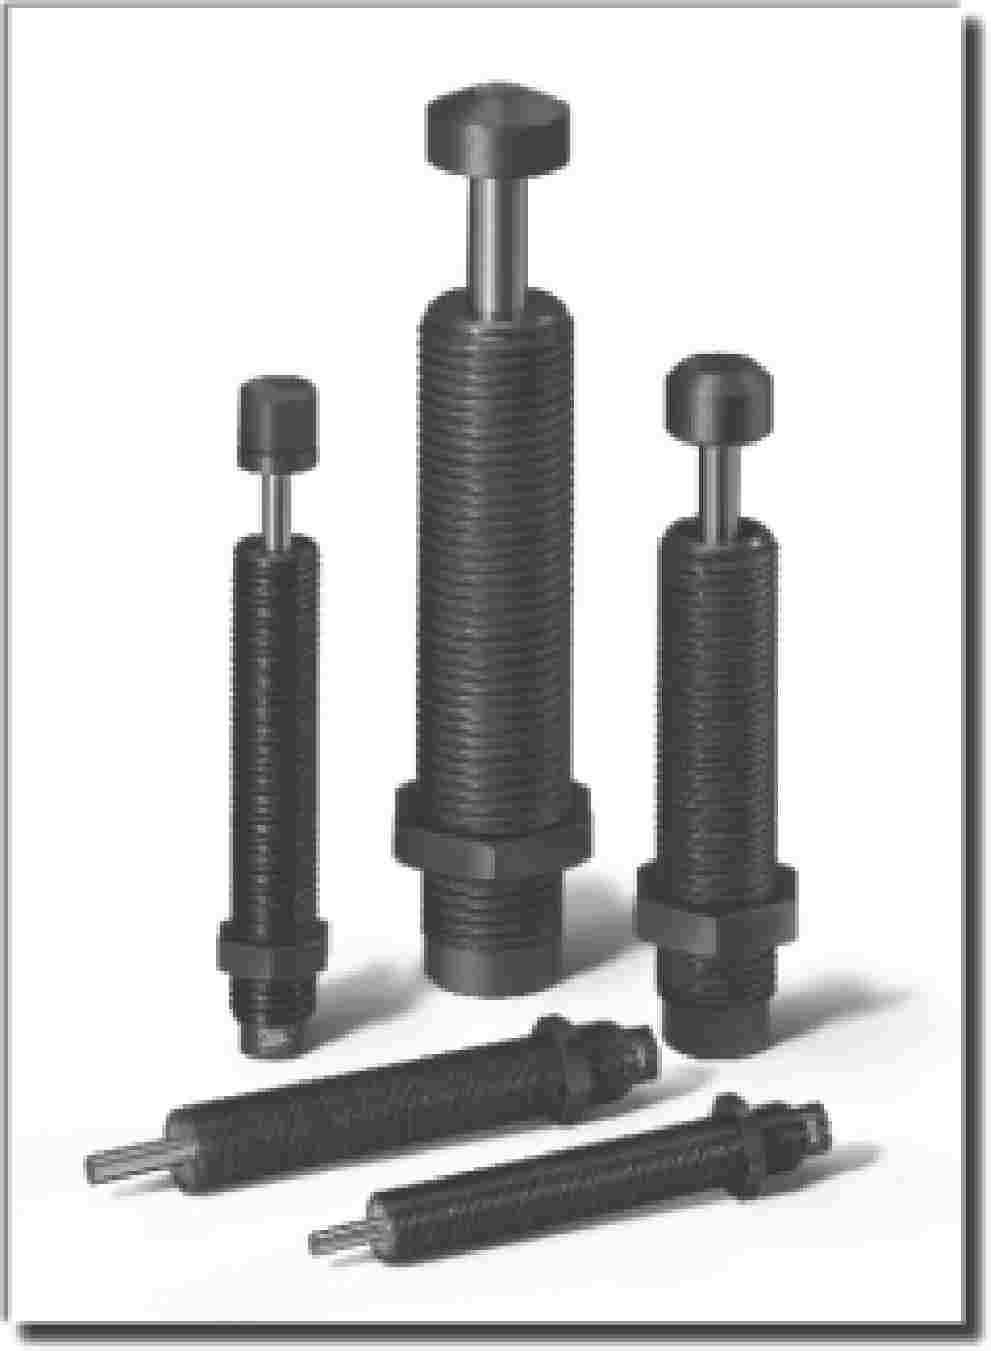 Ultra-High Energy Absorption SC 5 to SC 650 Heavyweight Shock Absorbers Featuring New SC 5, 75 & 190 Models Features.